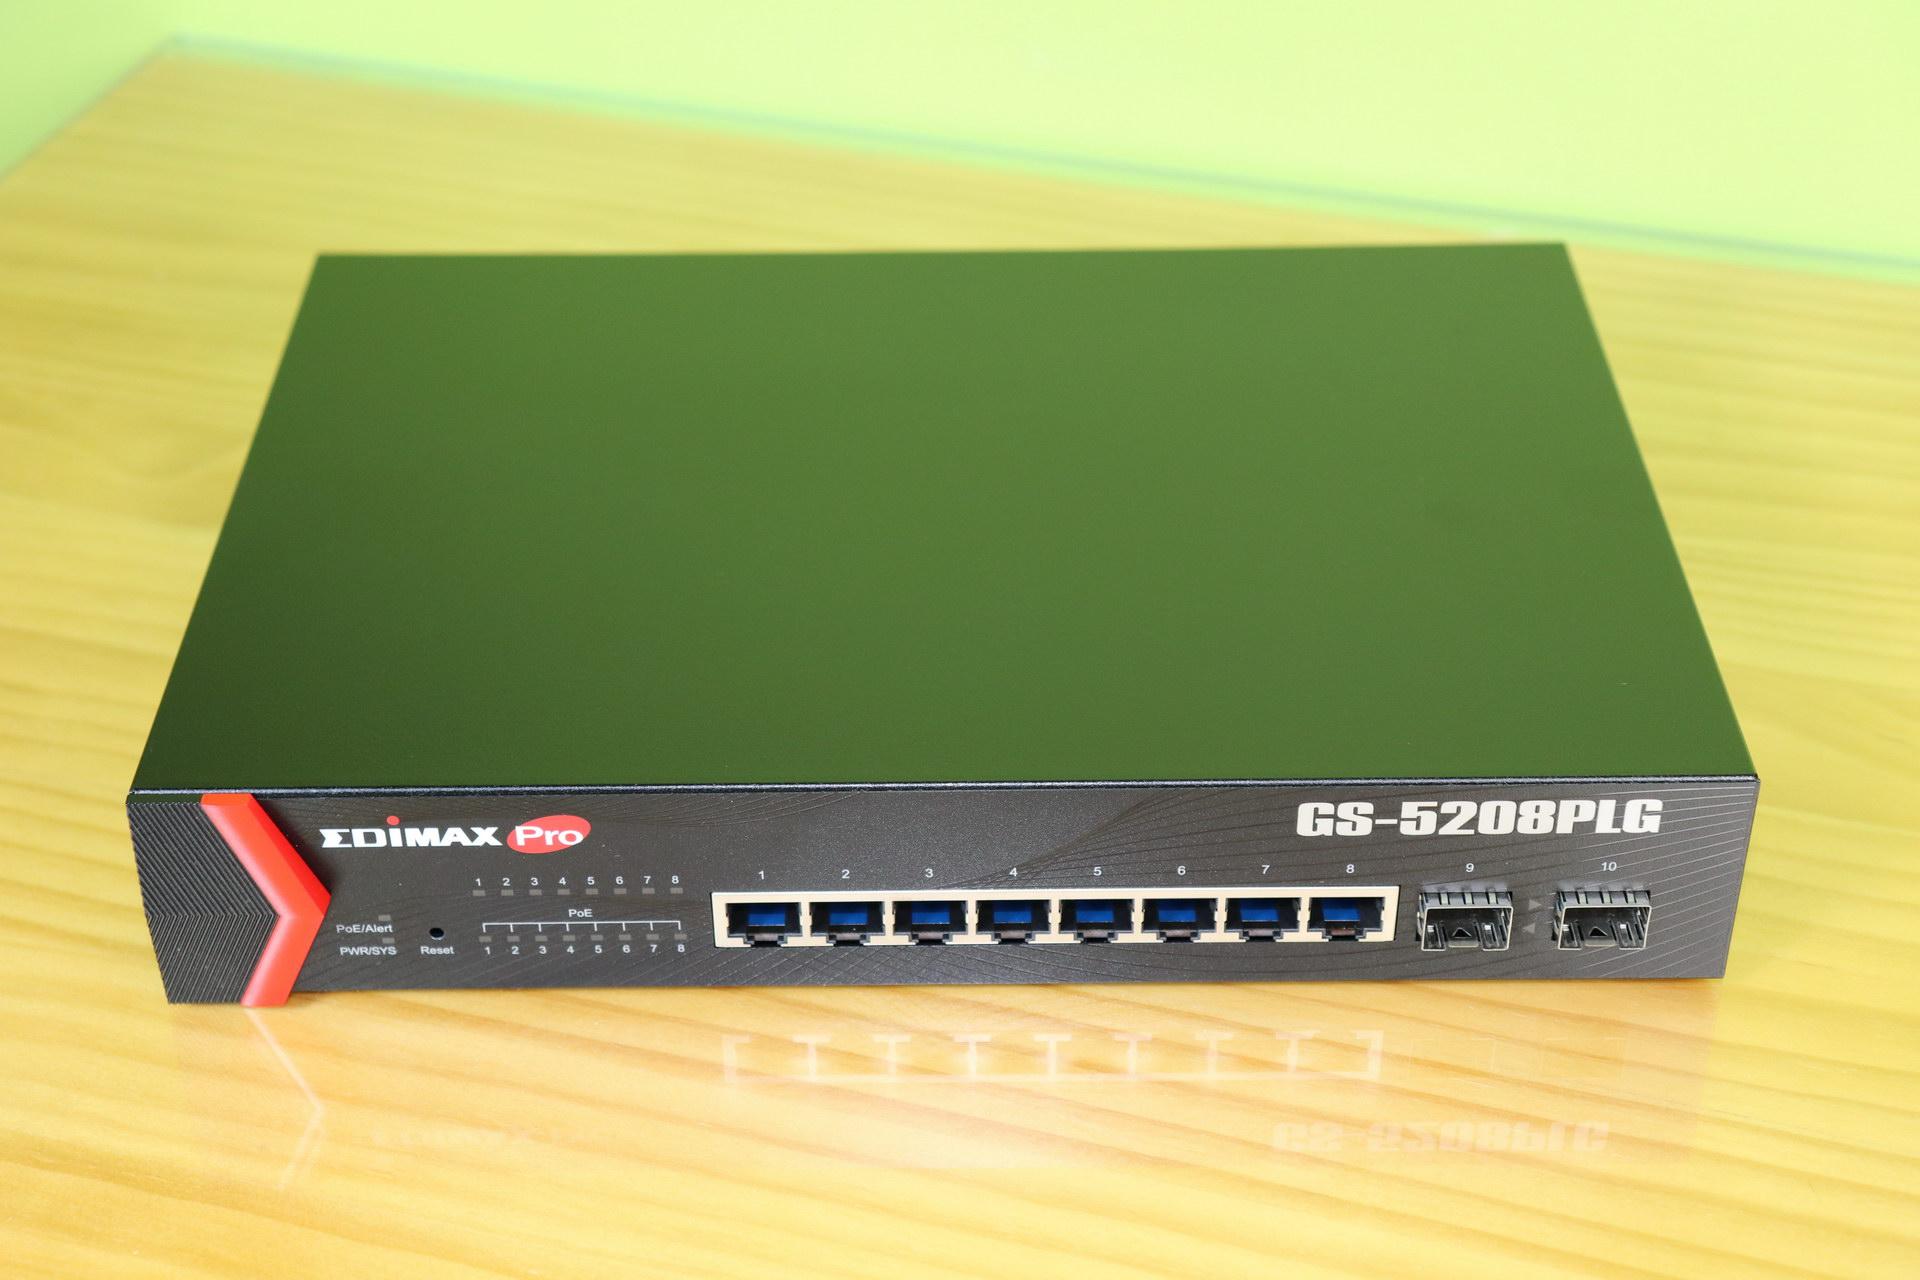 Frontal del switch gestionable Edimax GS-5208PLG